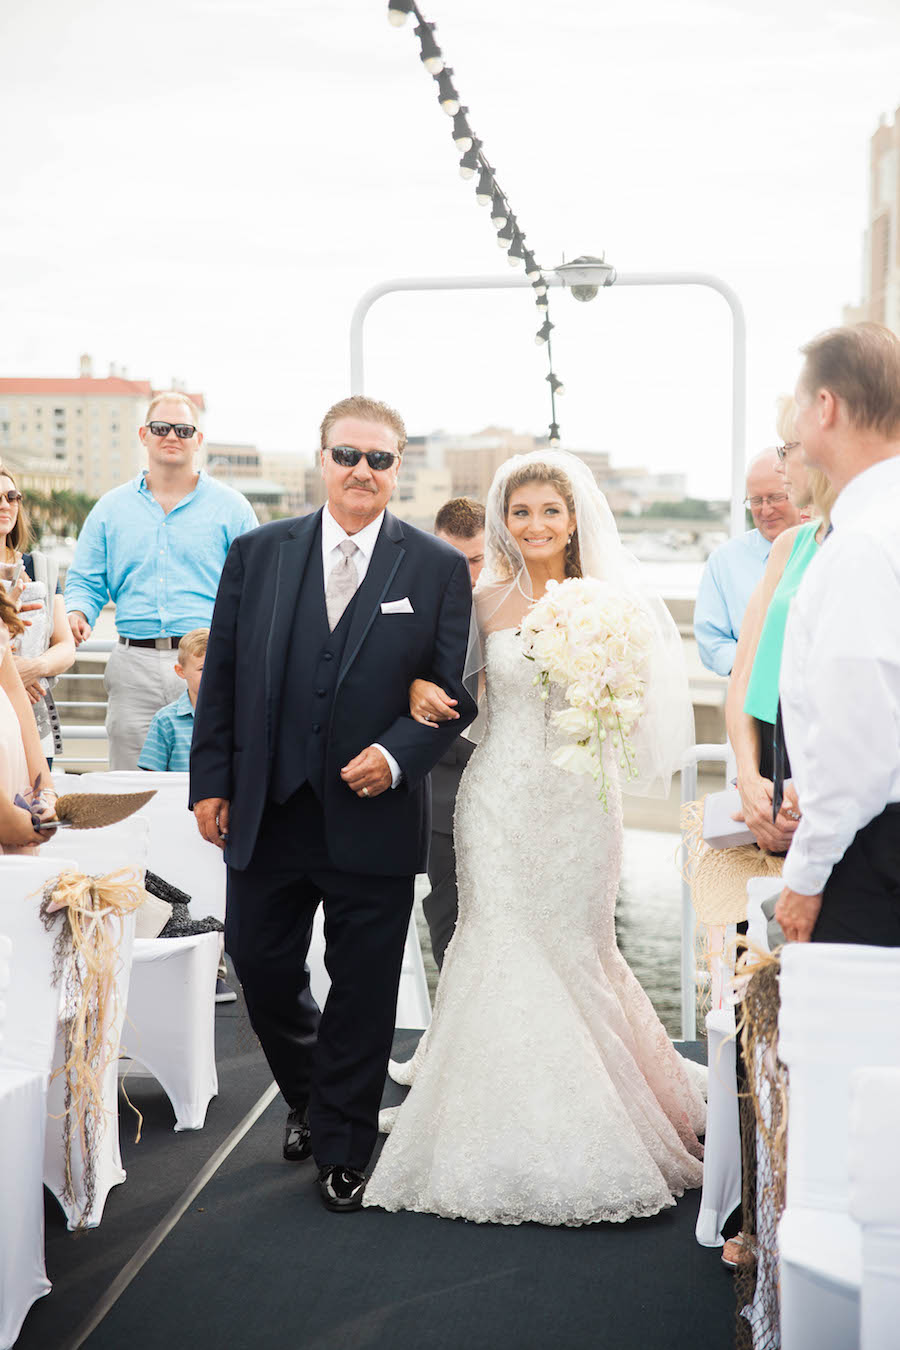 Outdoor, Nautical Wedding Ceremony with Bride and Father of Bride Walking Down the Aisle